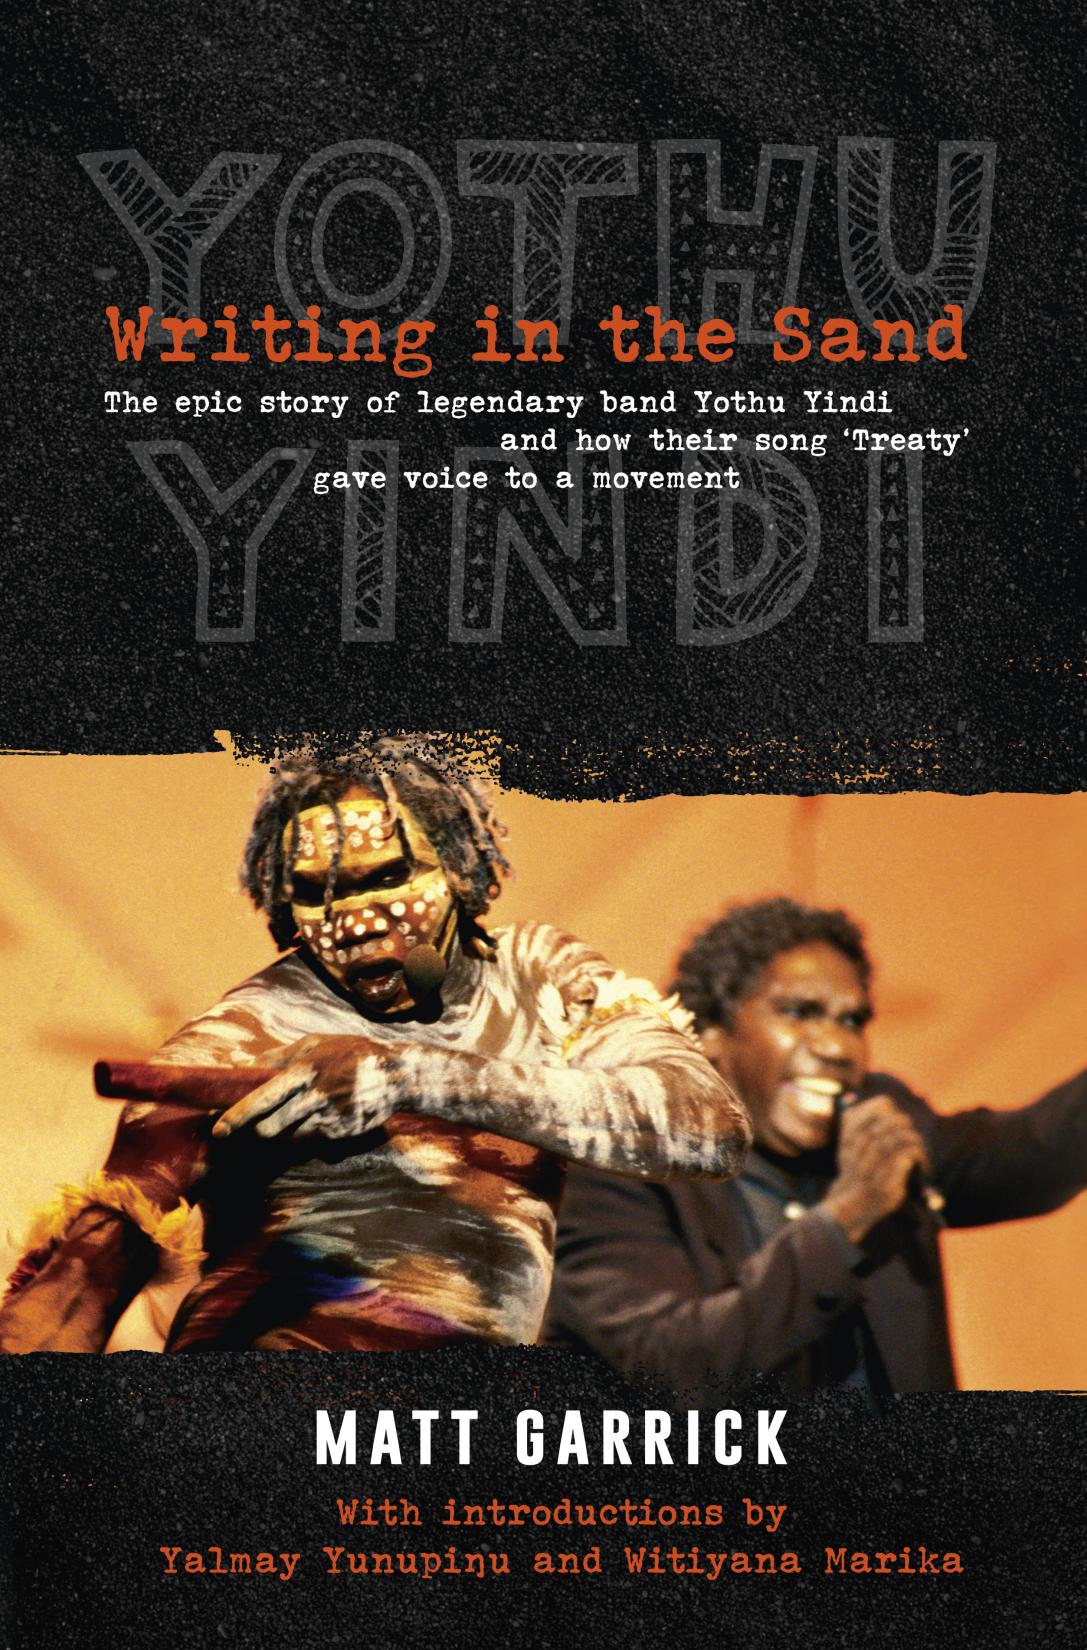 Cover of the book. Top has writing 'Writing in the sand' in big red font. below that in white smaller font it has 'the epic story of legendary band yothu yindi and how their song treaty gave voice to a movement'. the words Yothu Yindi are behind this writing in faint grey text. Image of M Yuninpingu and another Aboriginal dancer in traditional dress are below the text. 